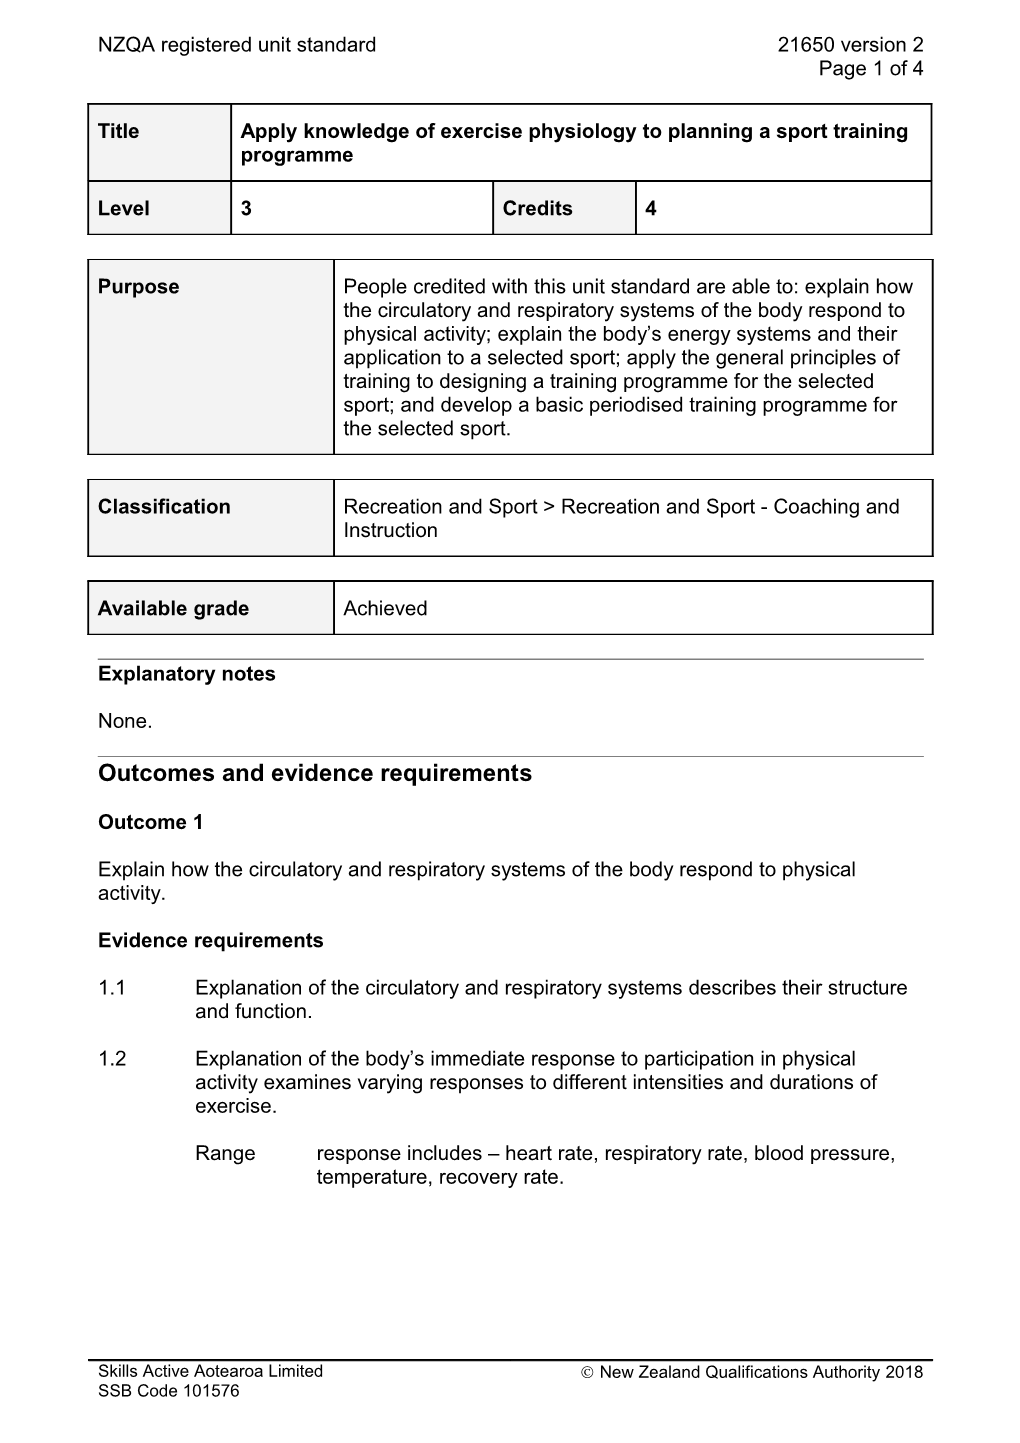 21650 Apply Knowledge of Exercise Physiology to Planning a Sport Training Programme